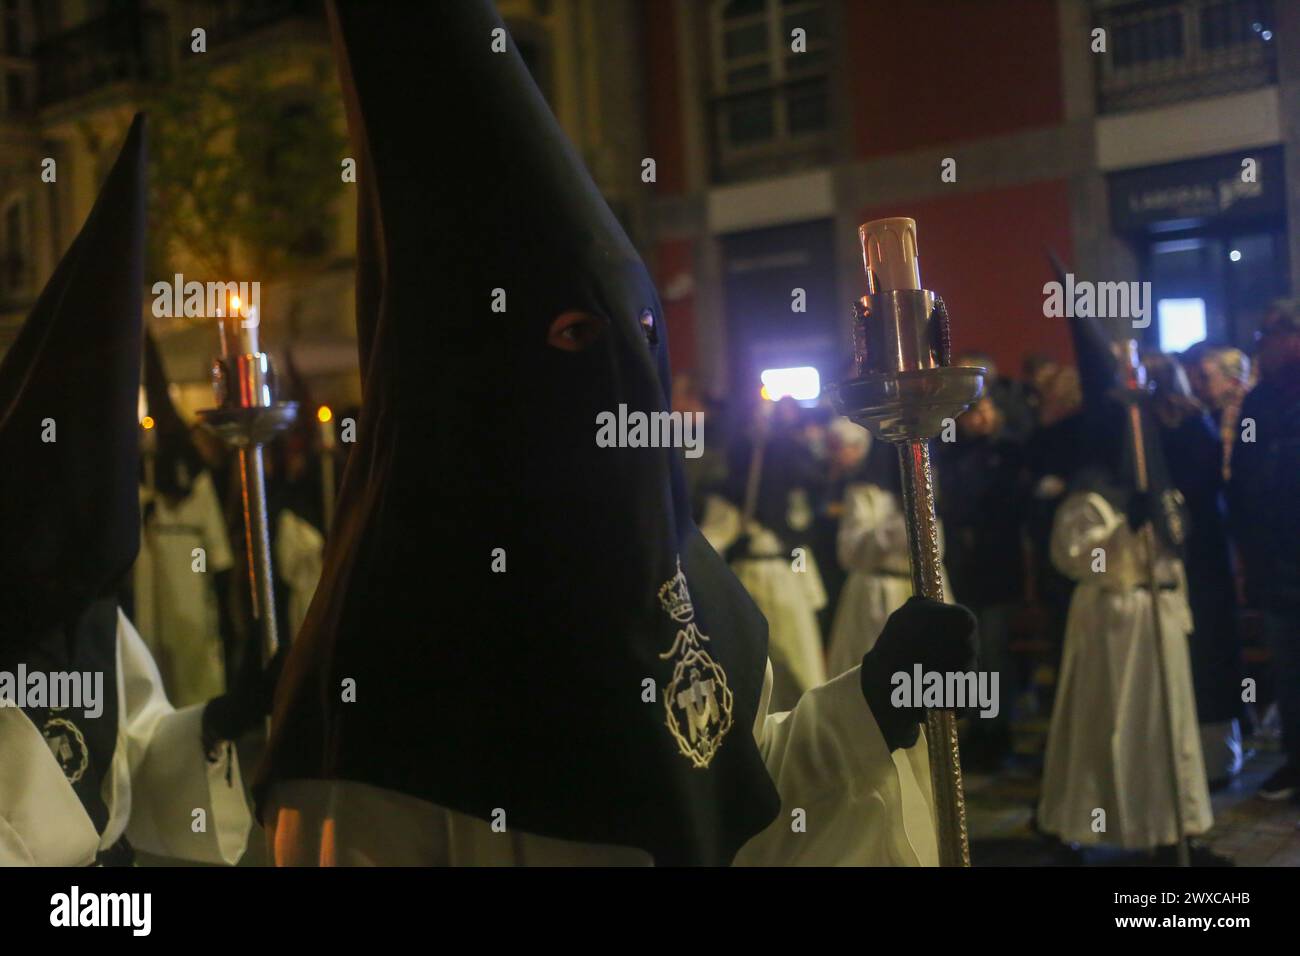 Avilés, Spain, March 29, 2024: A Nazarene carries a candle during Good Friday in Avilés, on March 29, 2024, in Avilés, Spain. Credit: Alberto Brevers / Alamy Live News. Stock Photo